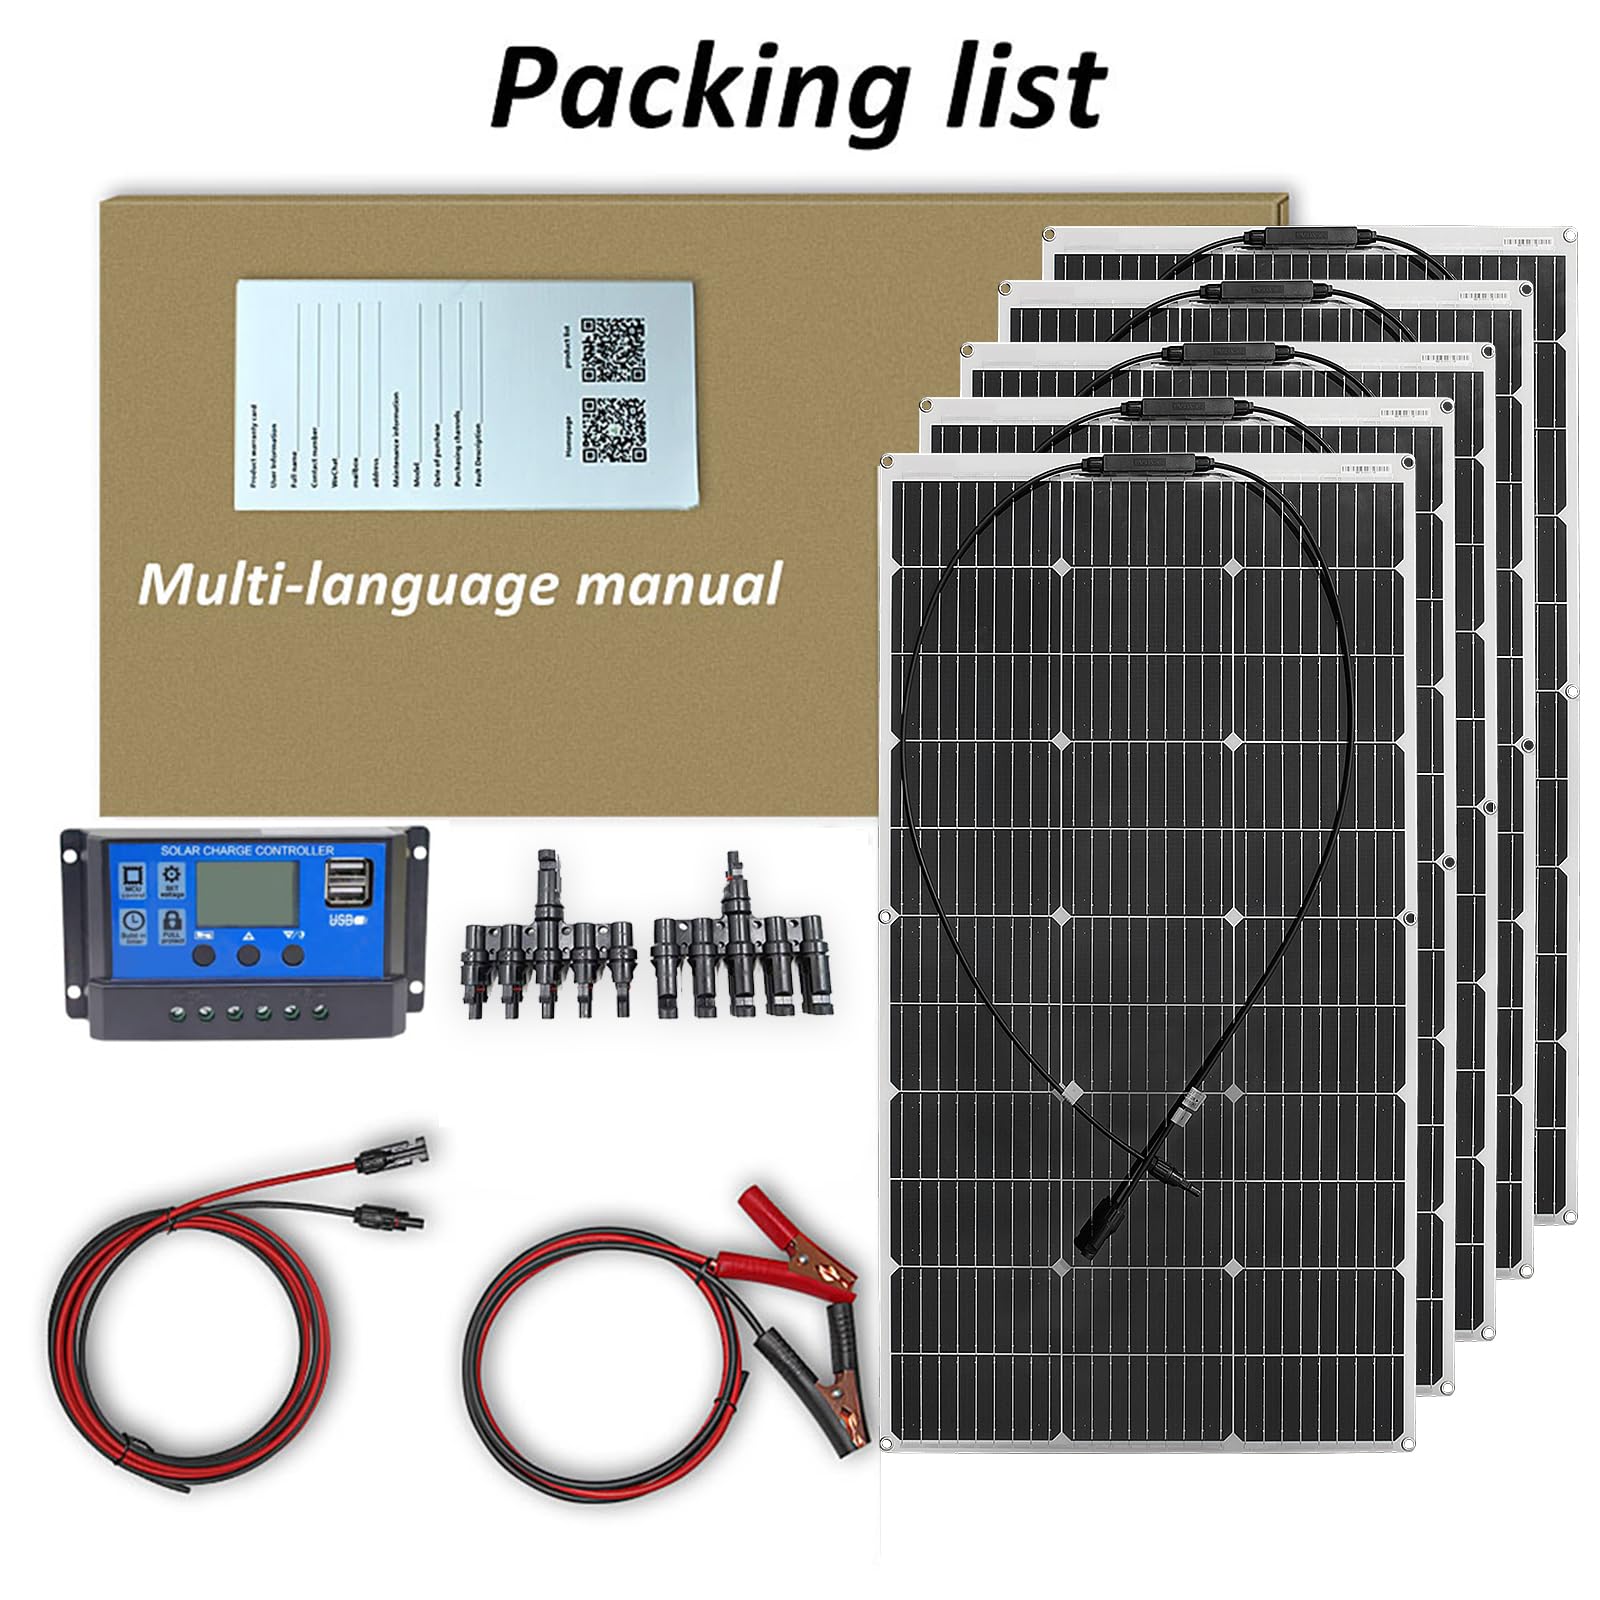 Solar Panel Kit 500W 5 * 100W Flexible Solar Panel 12V Photovoltaic Waterproof Solar Charger 50A Solar Controller+3m Cable+1m Battery Clip Cable for 12v Baterry Charger(500W solarpanel kit)